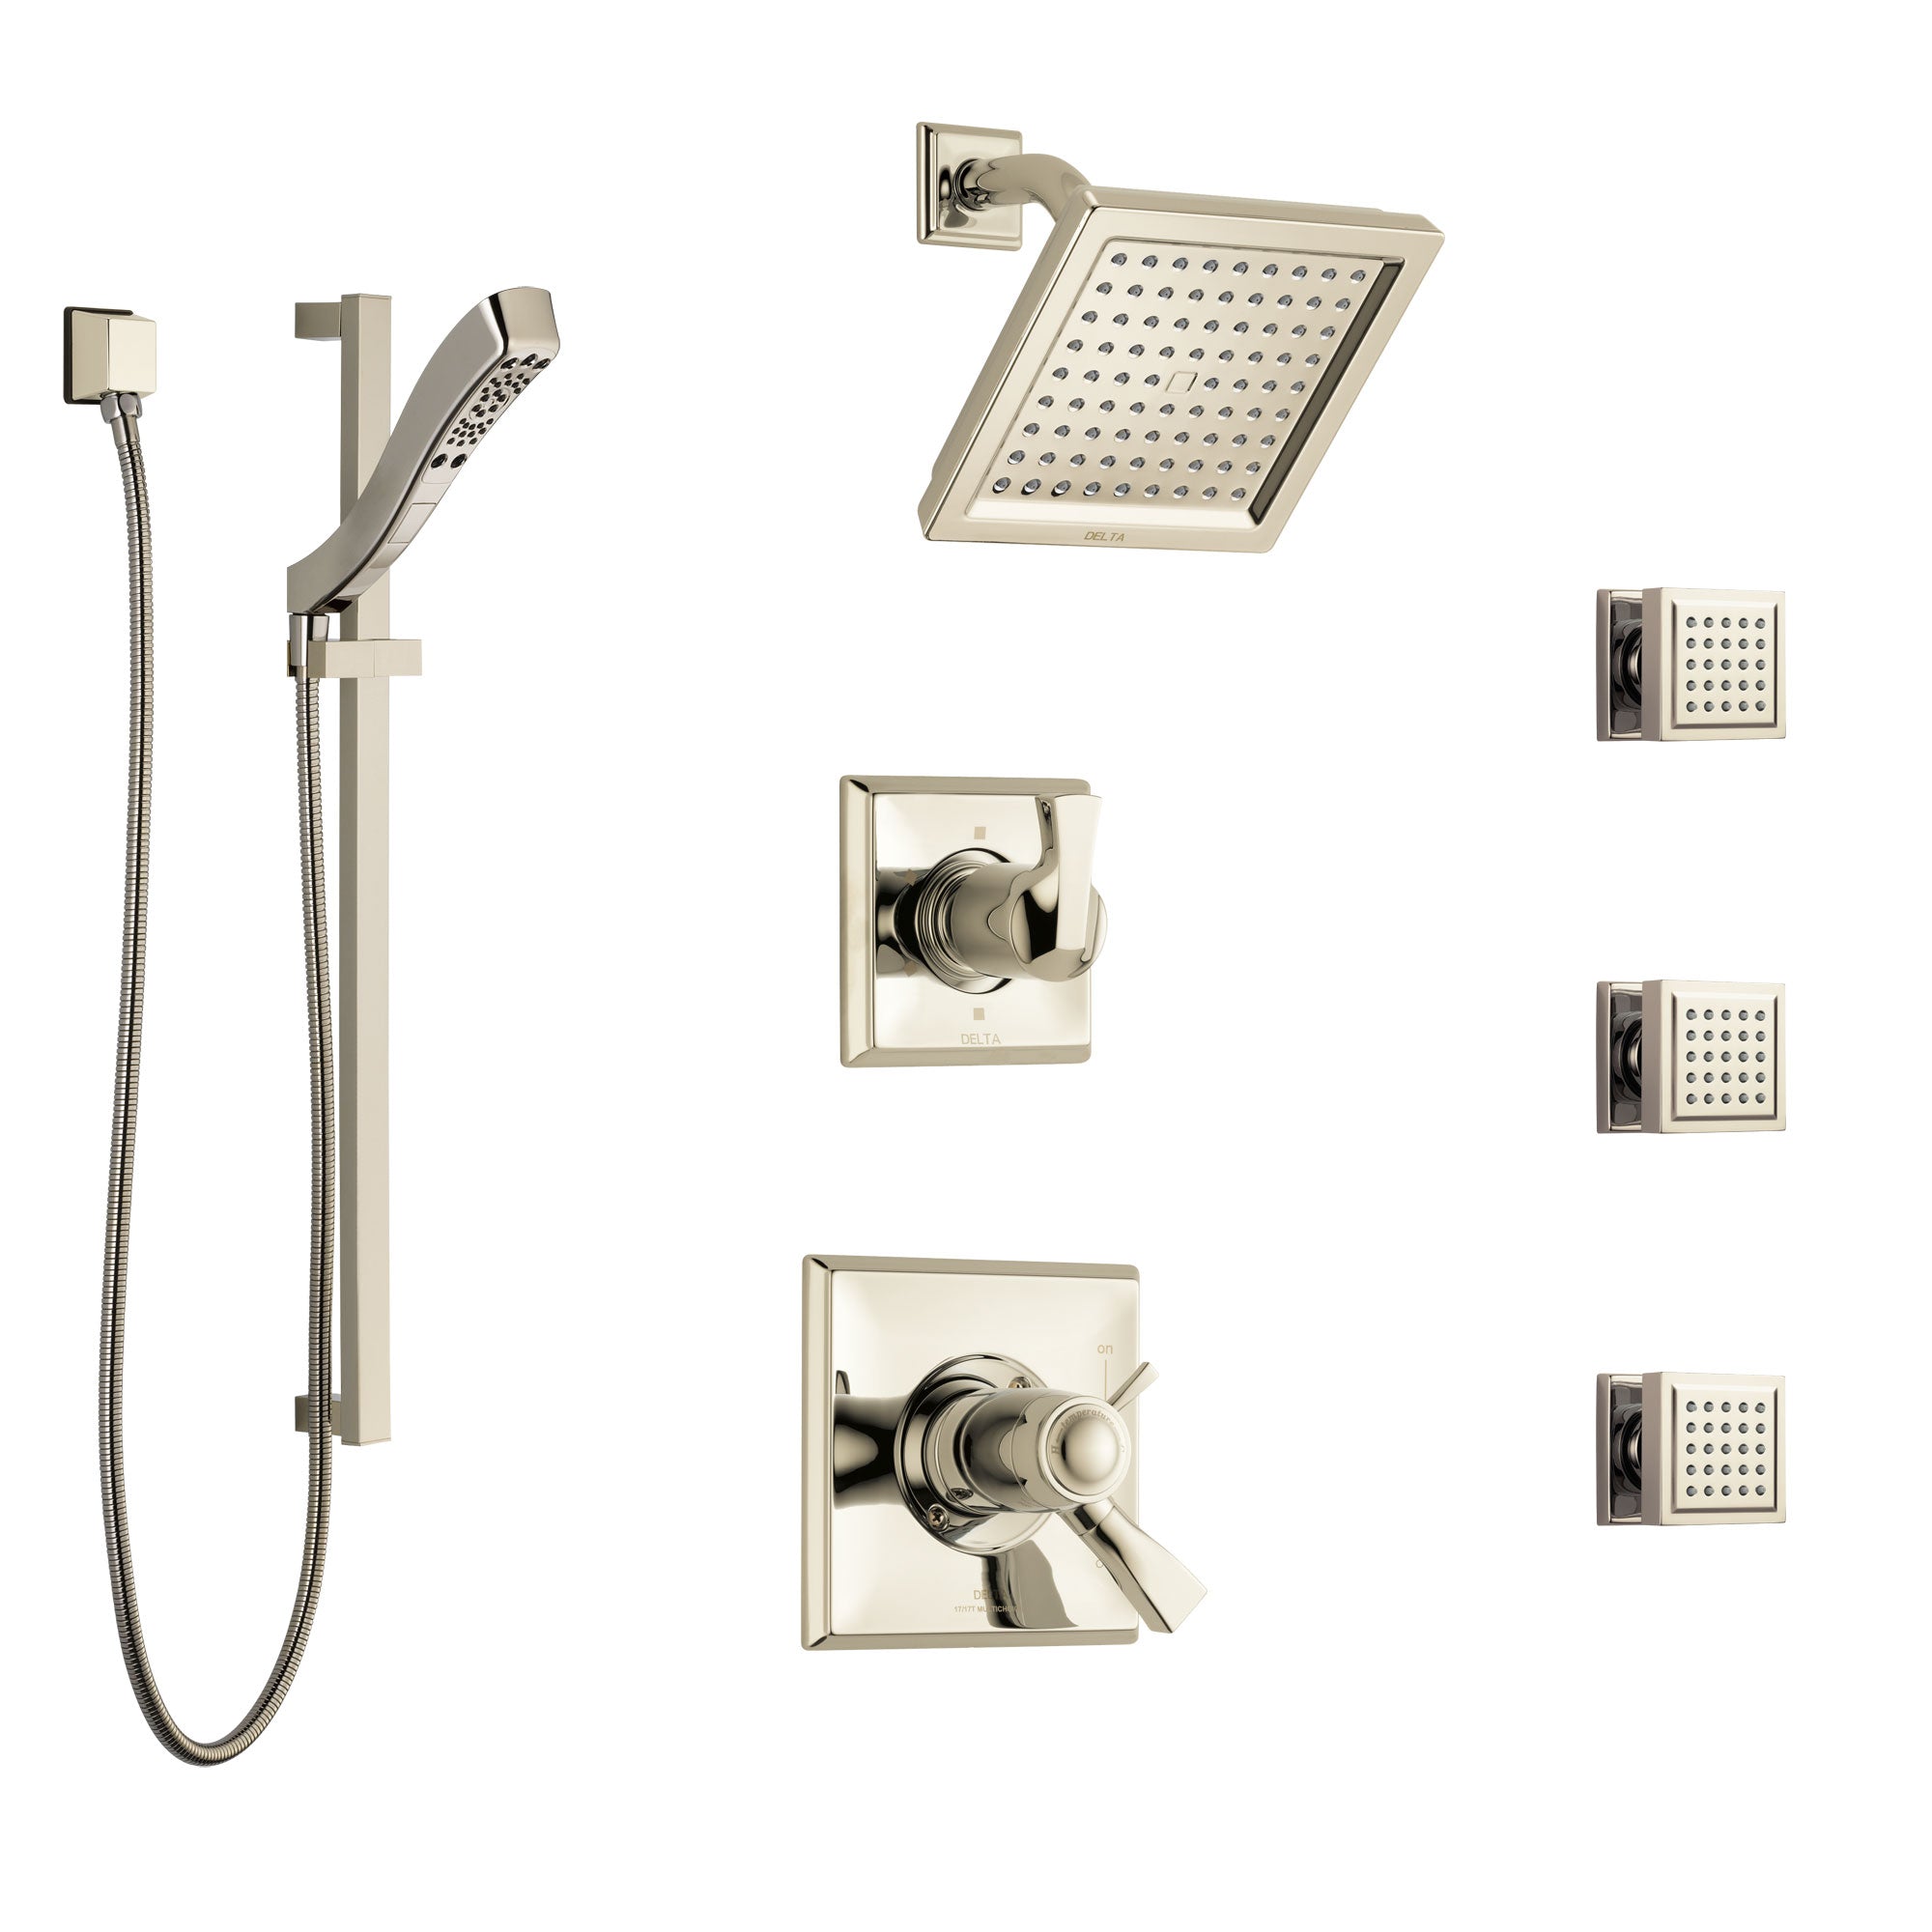 Delta Dryden Polished Nickel Shower System with Dual Thermostatic Control, 6-Setting Diverter, Showerhead, 3 Body Sprays, and Hand Shower SS17T2512PN2